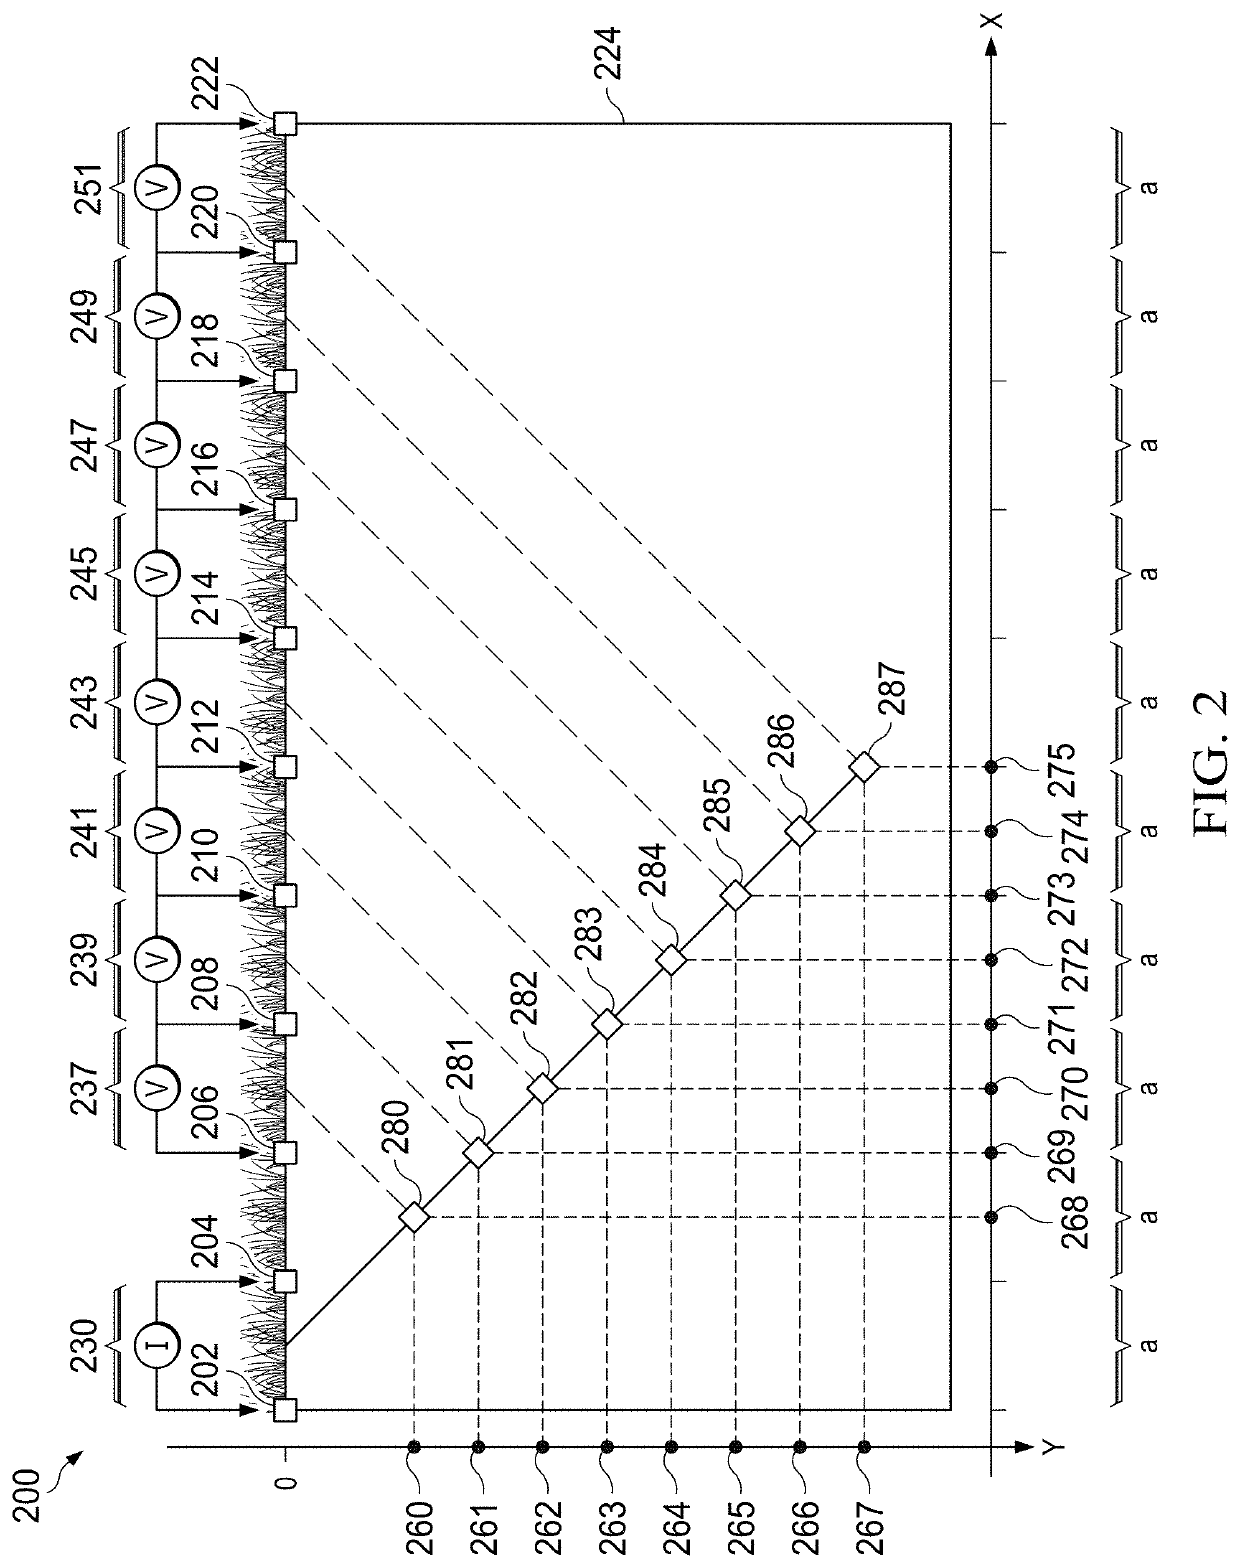 Architecture for a multichannel geophysical data acquisition system and method of use